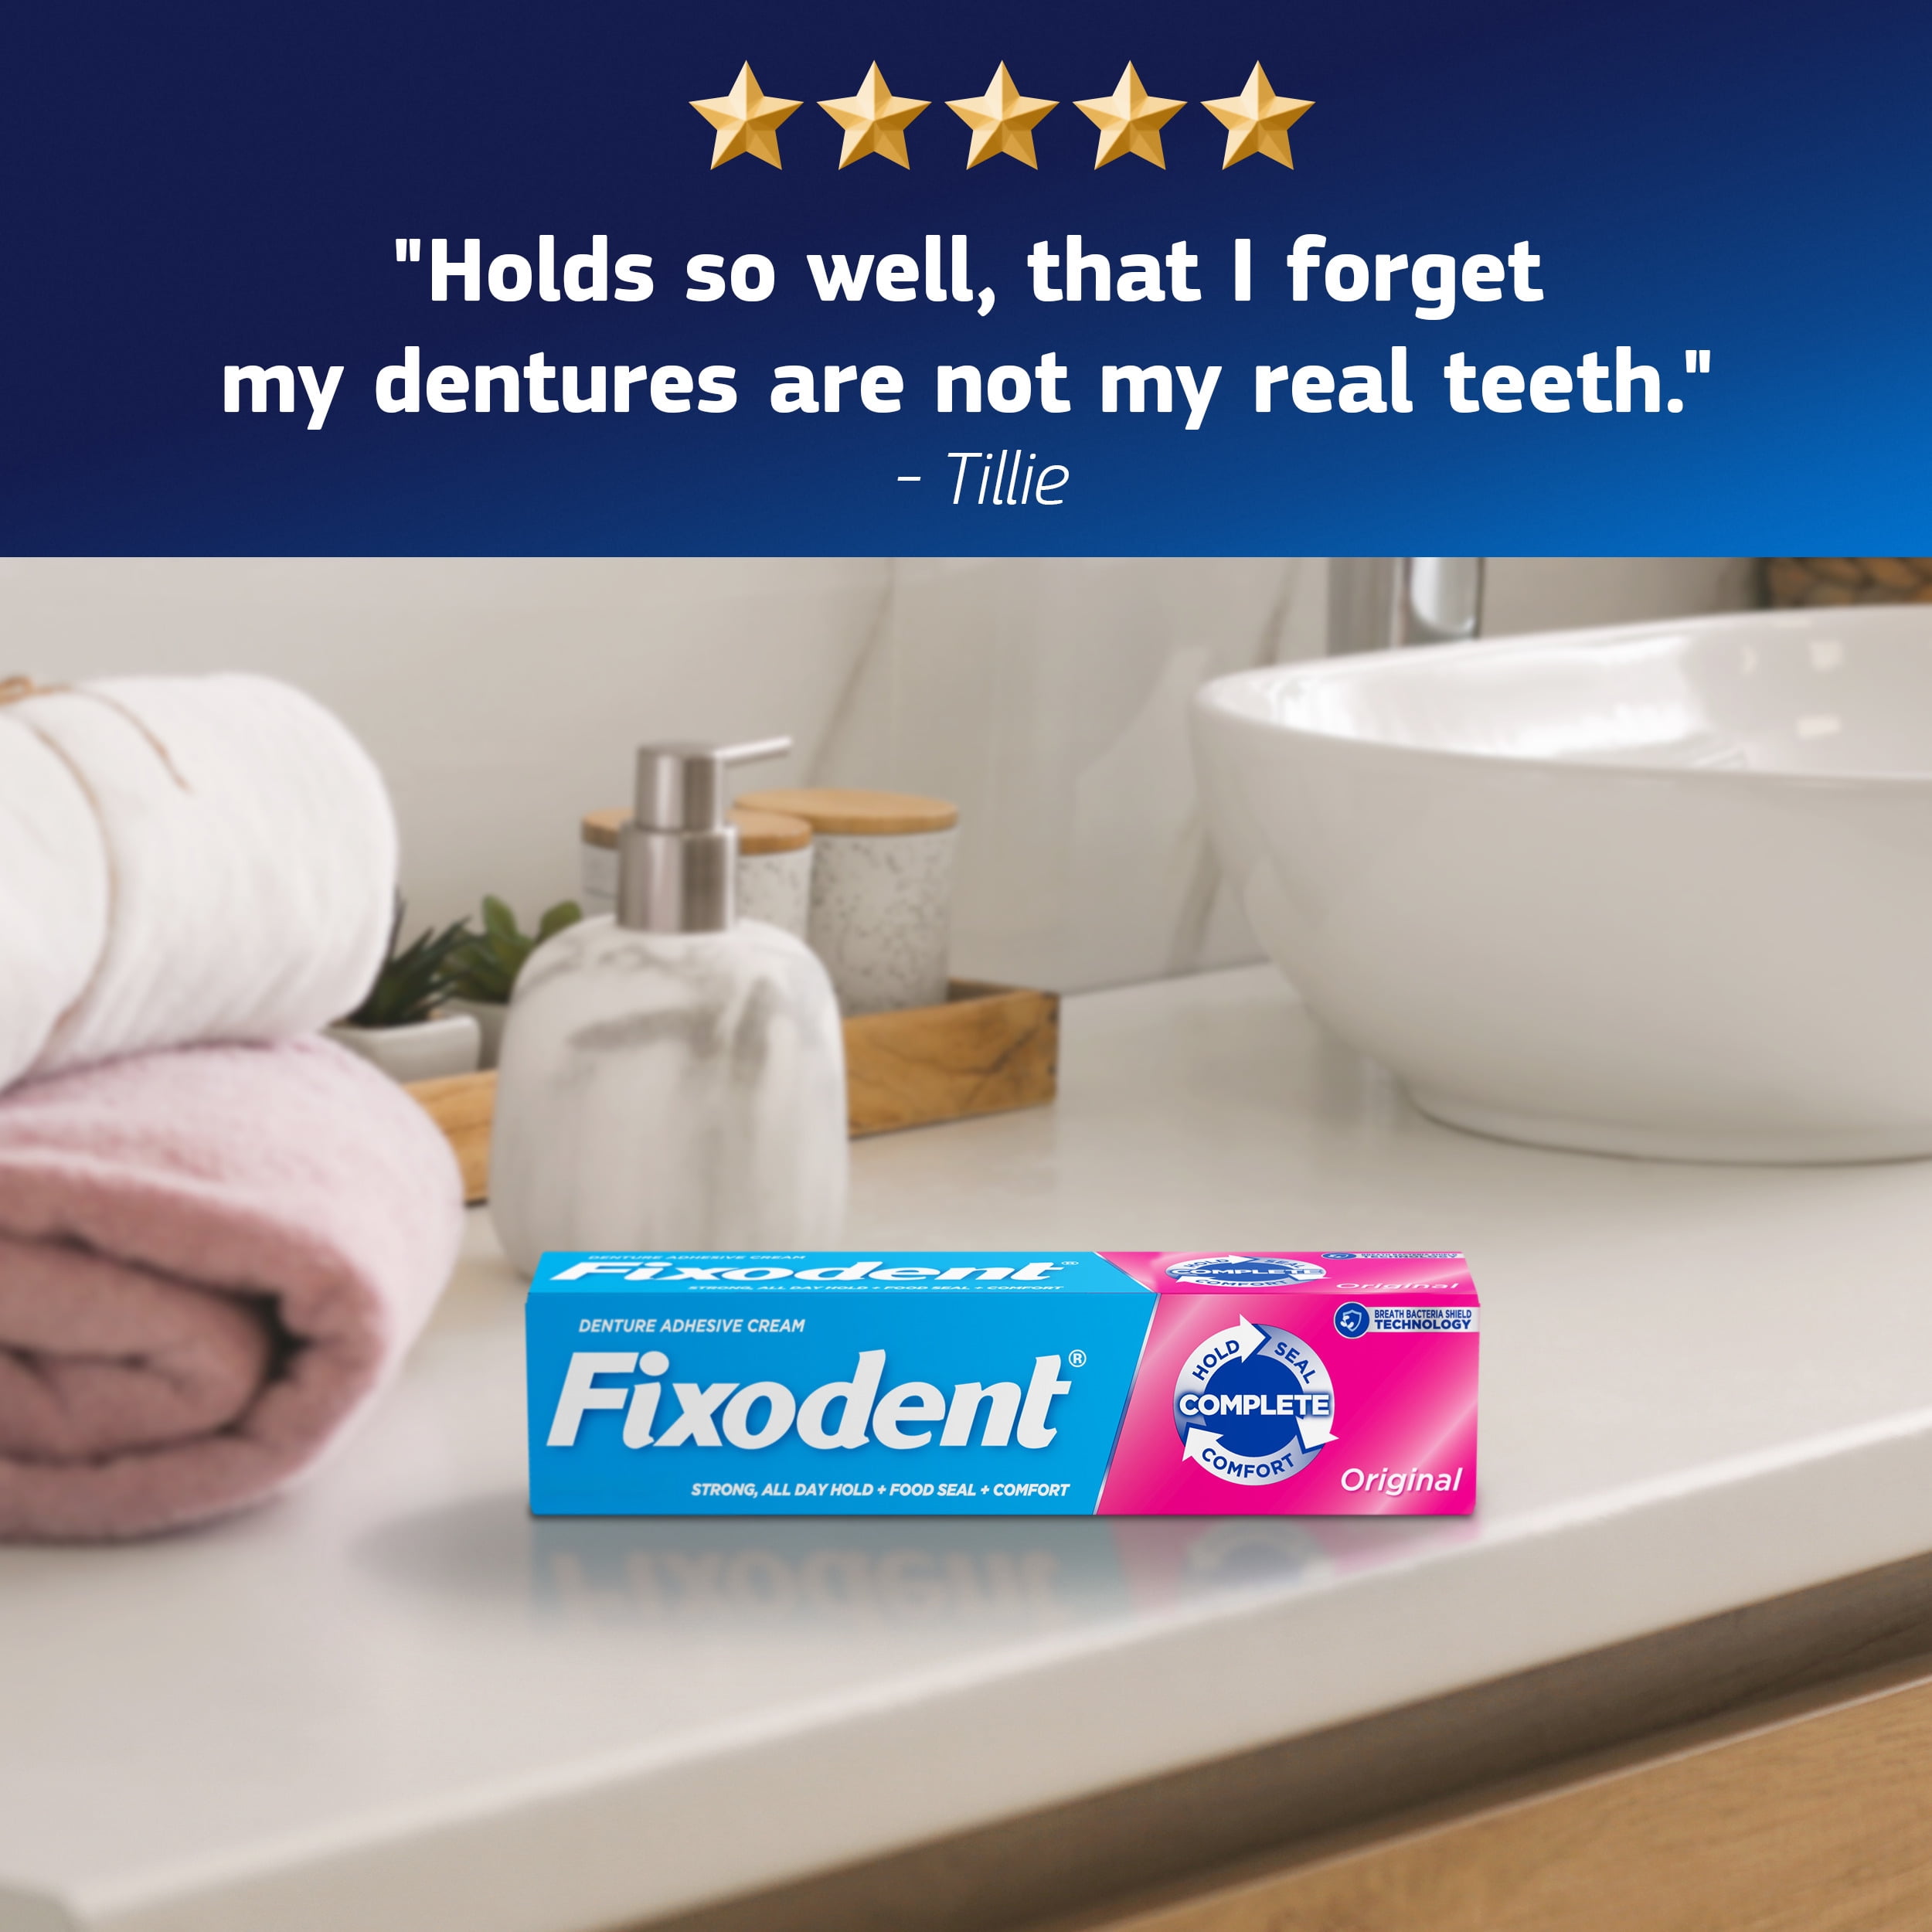 Fixodent denture adhesive cream, original, strong and long hold - 0.75 oz